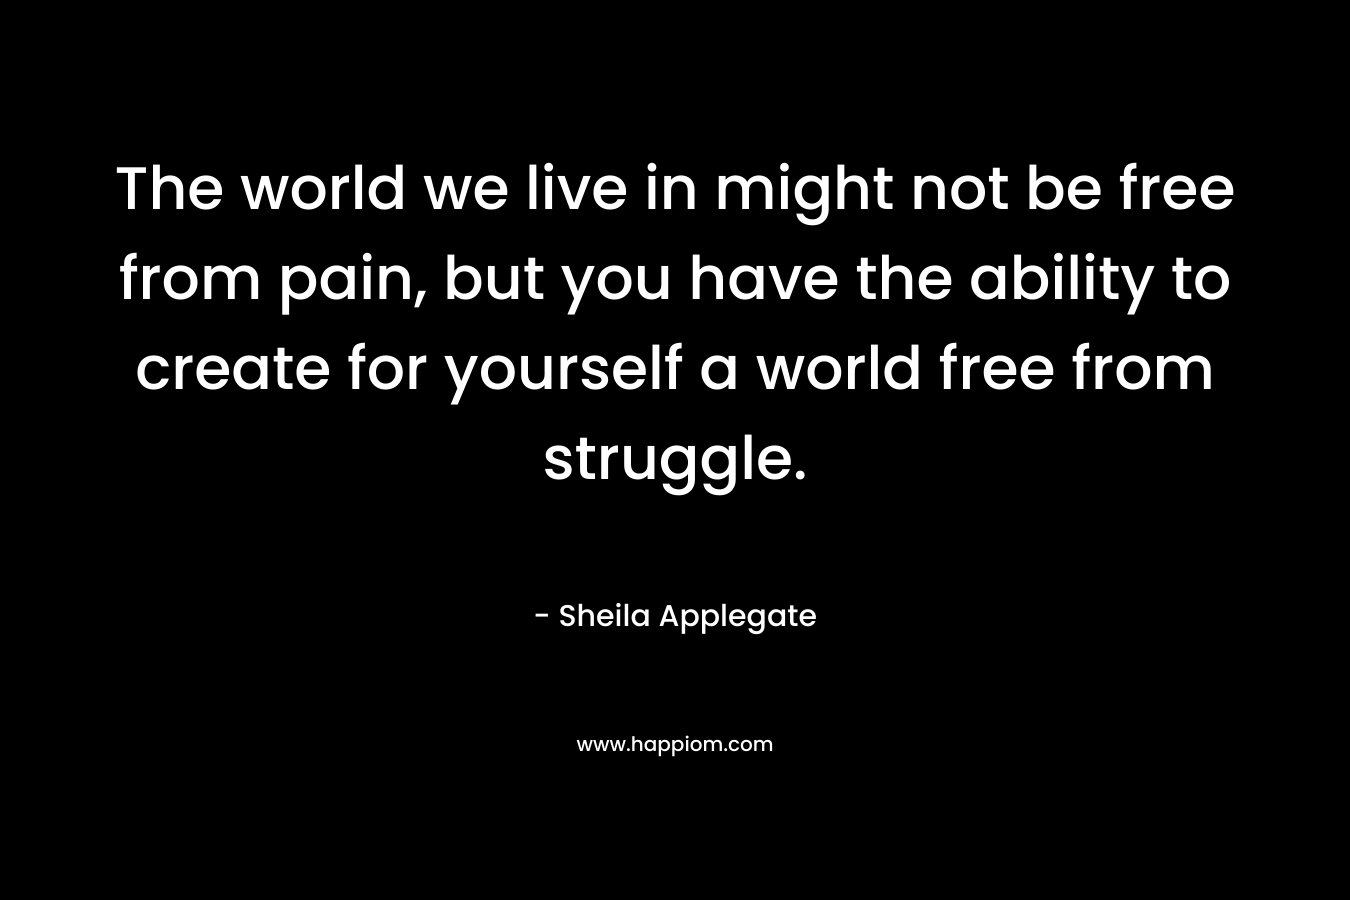 The world we live in might not be free from pain, but you have the ability to create for yourself a world free from struggle.